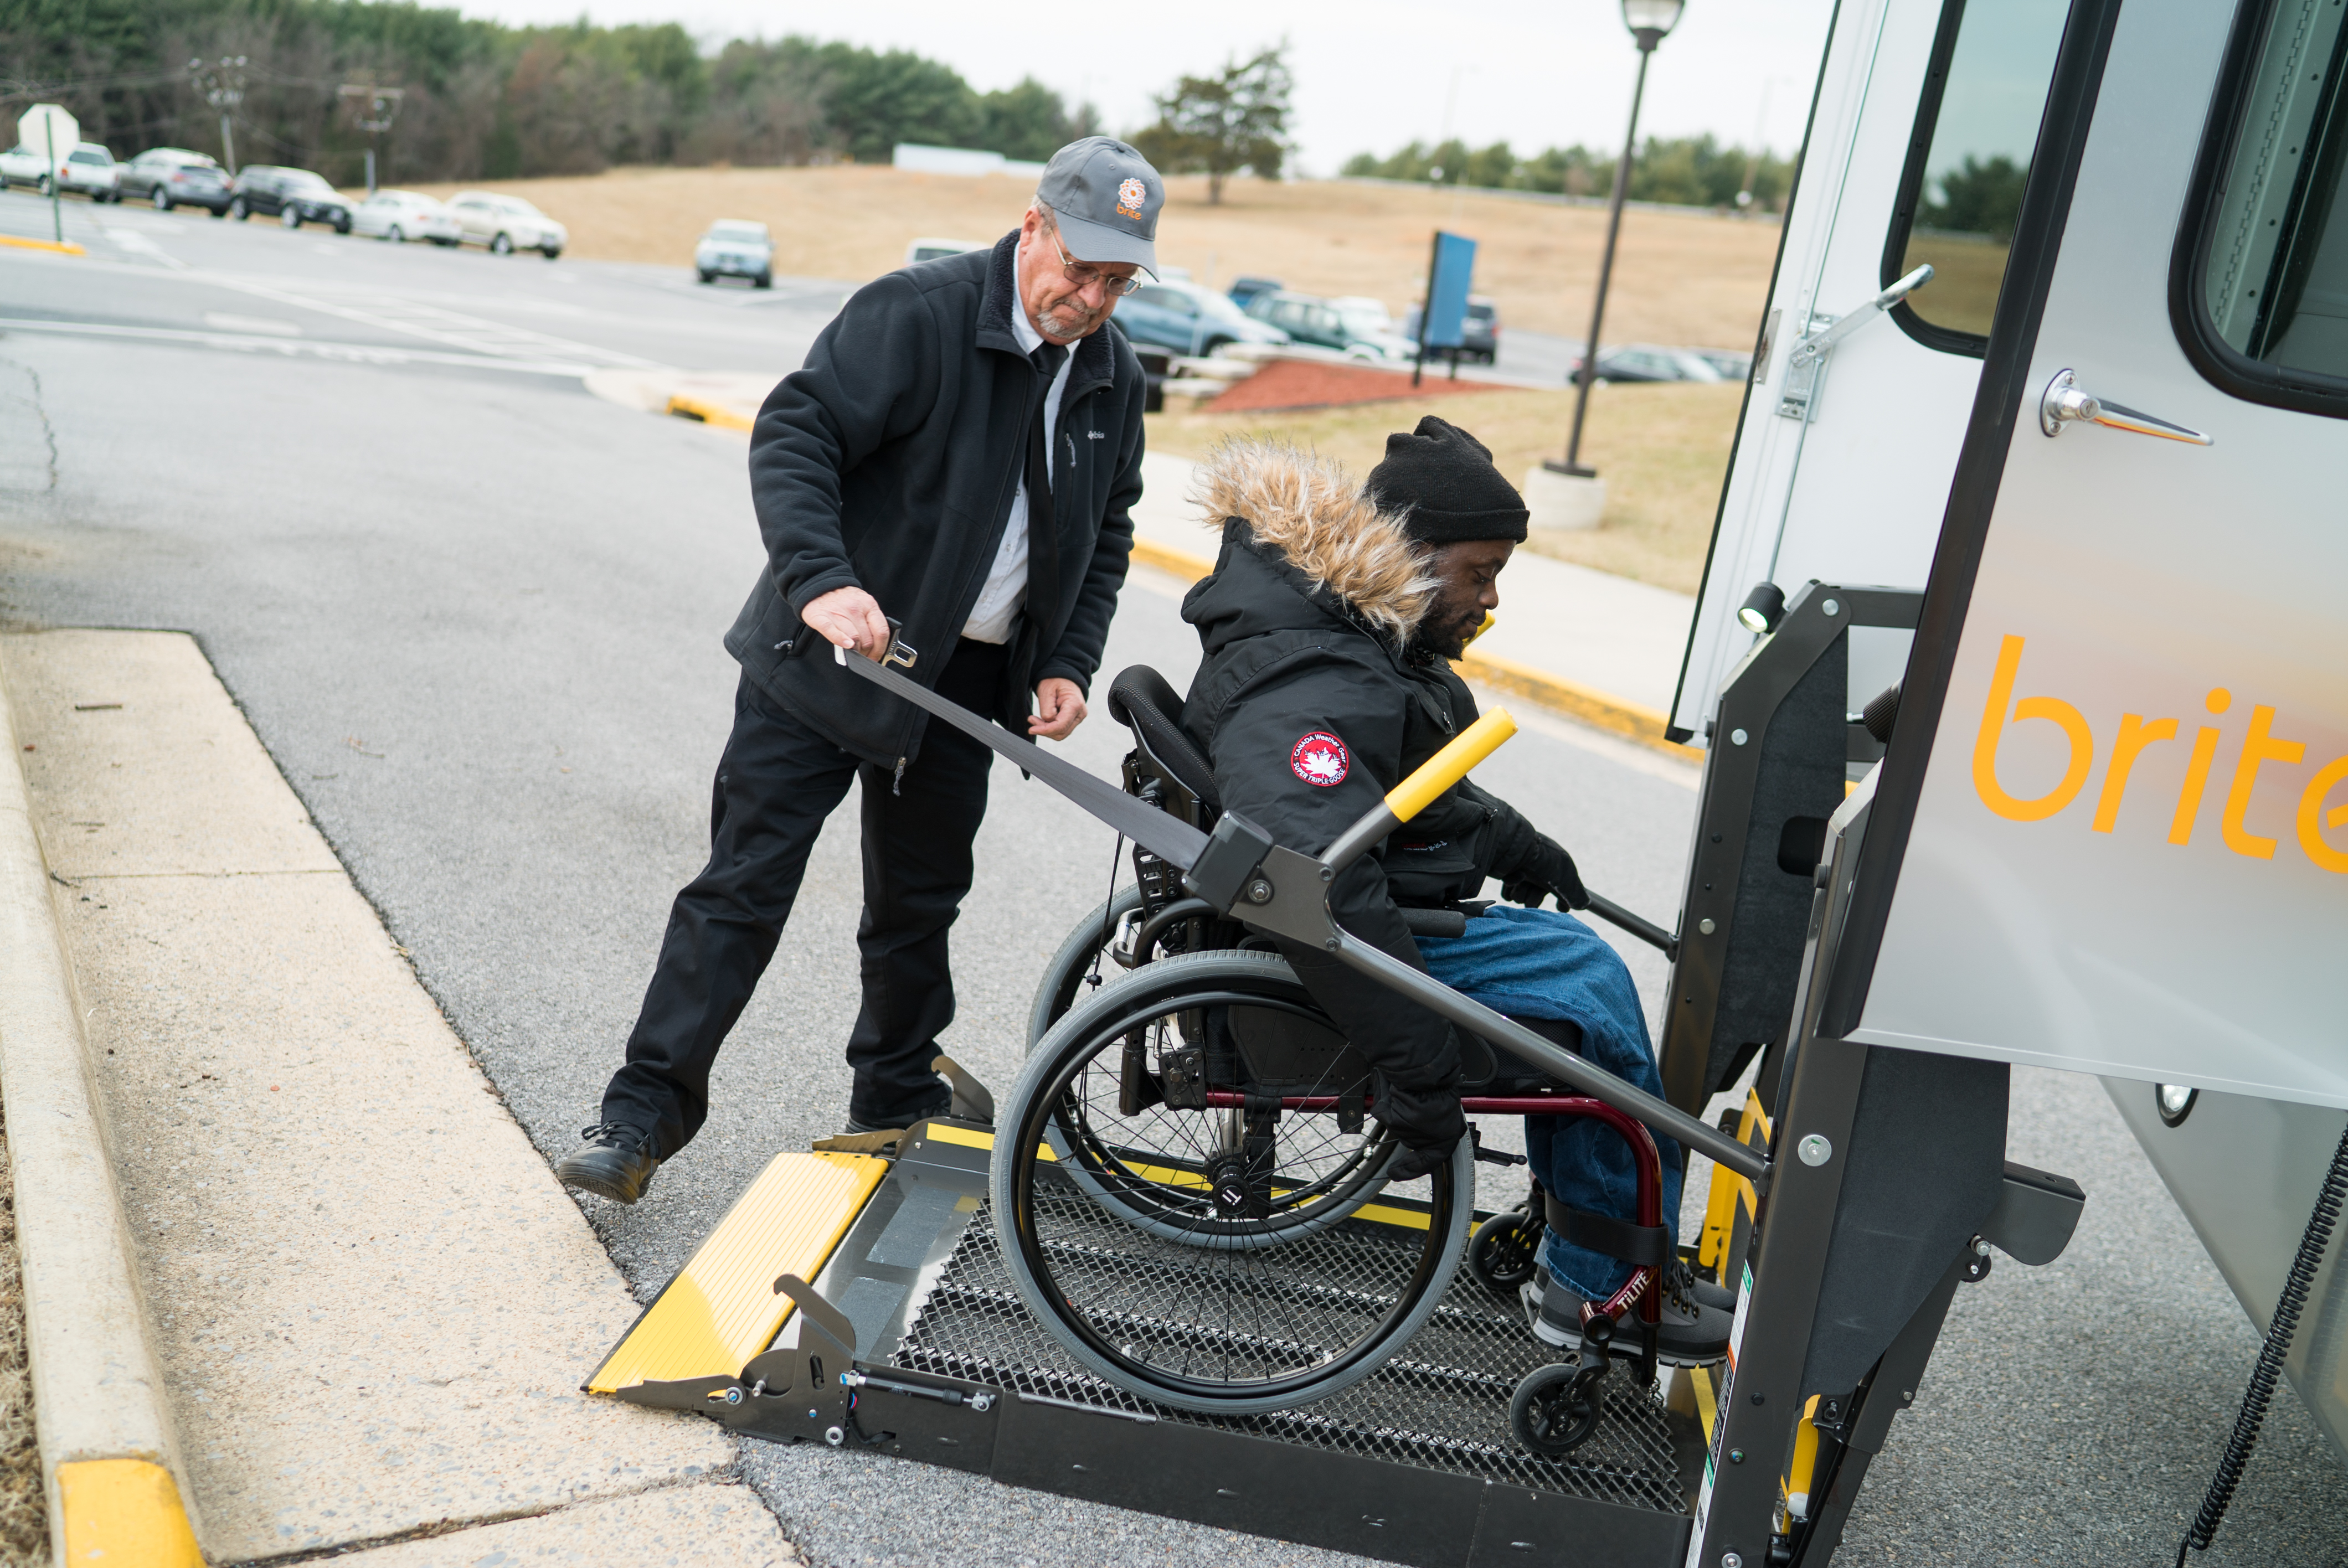 brite bus driver helping passenger with disability